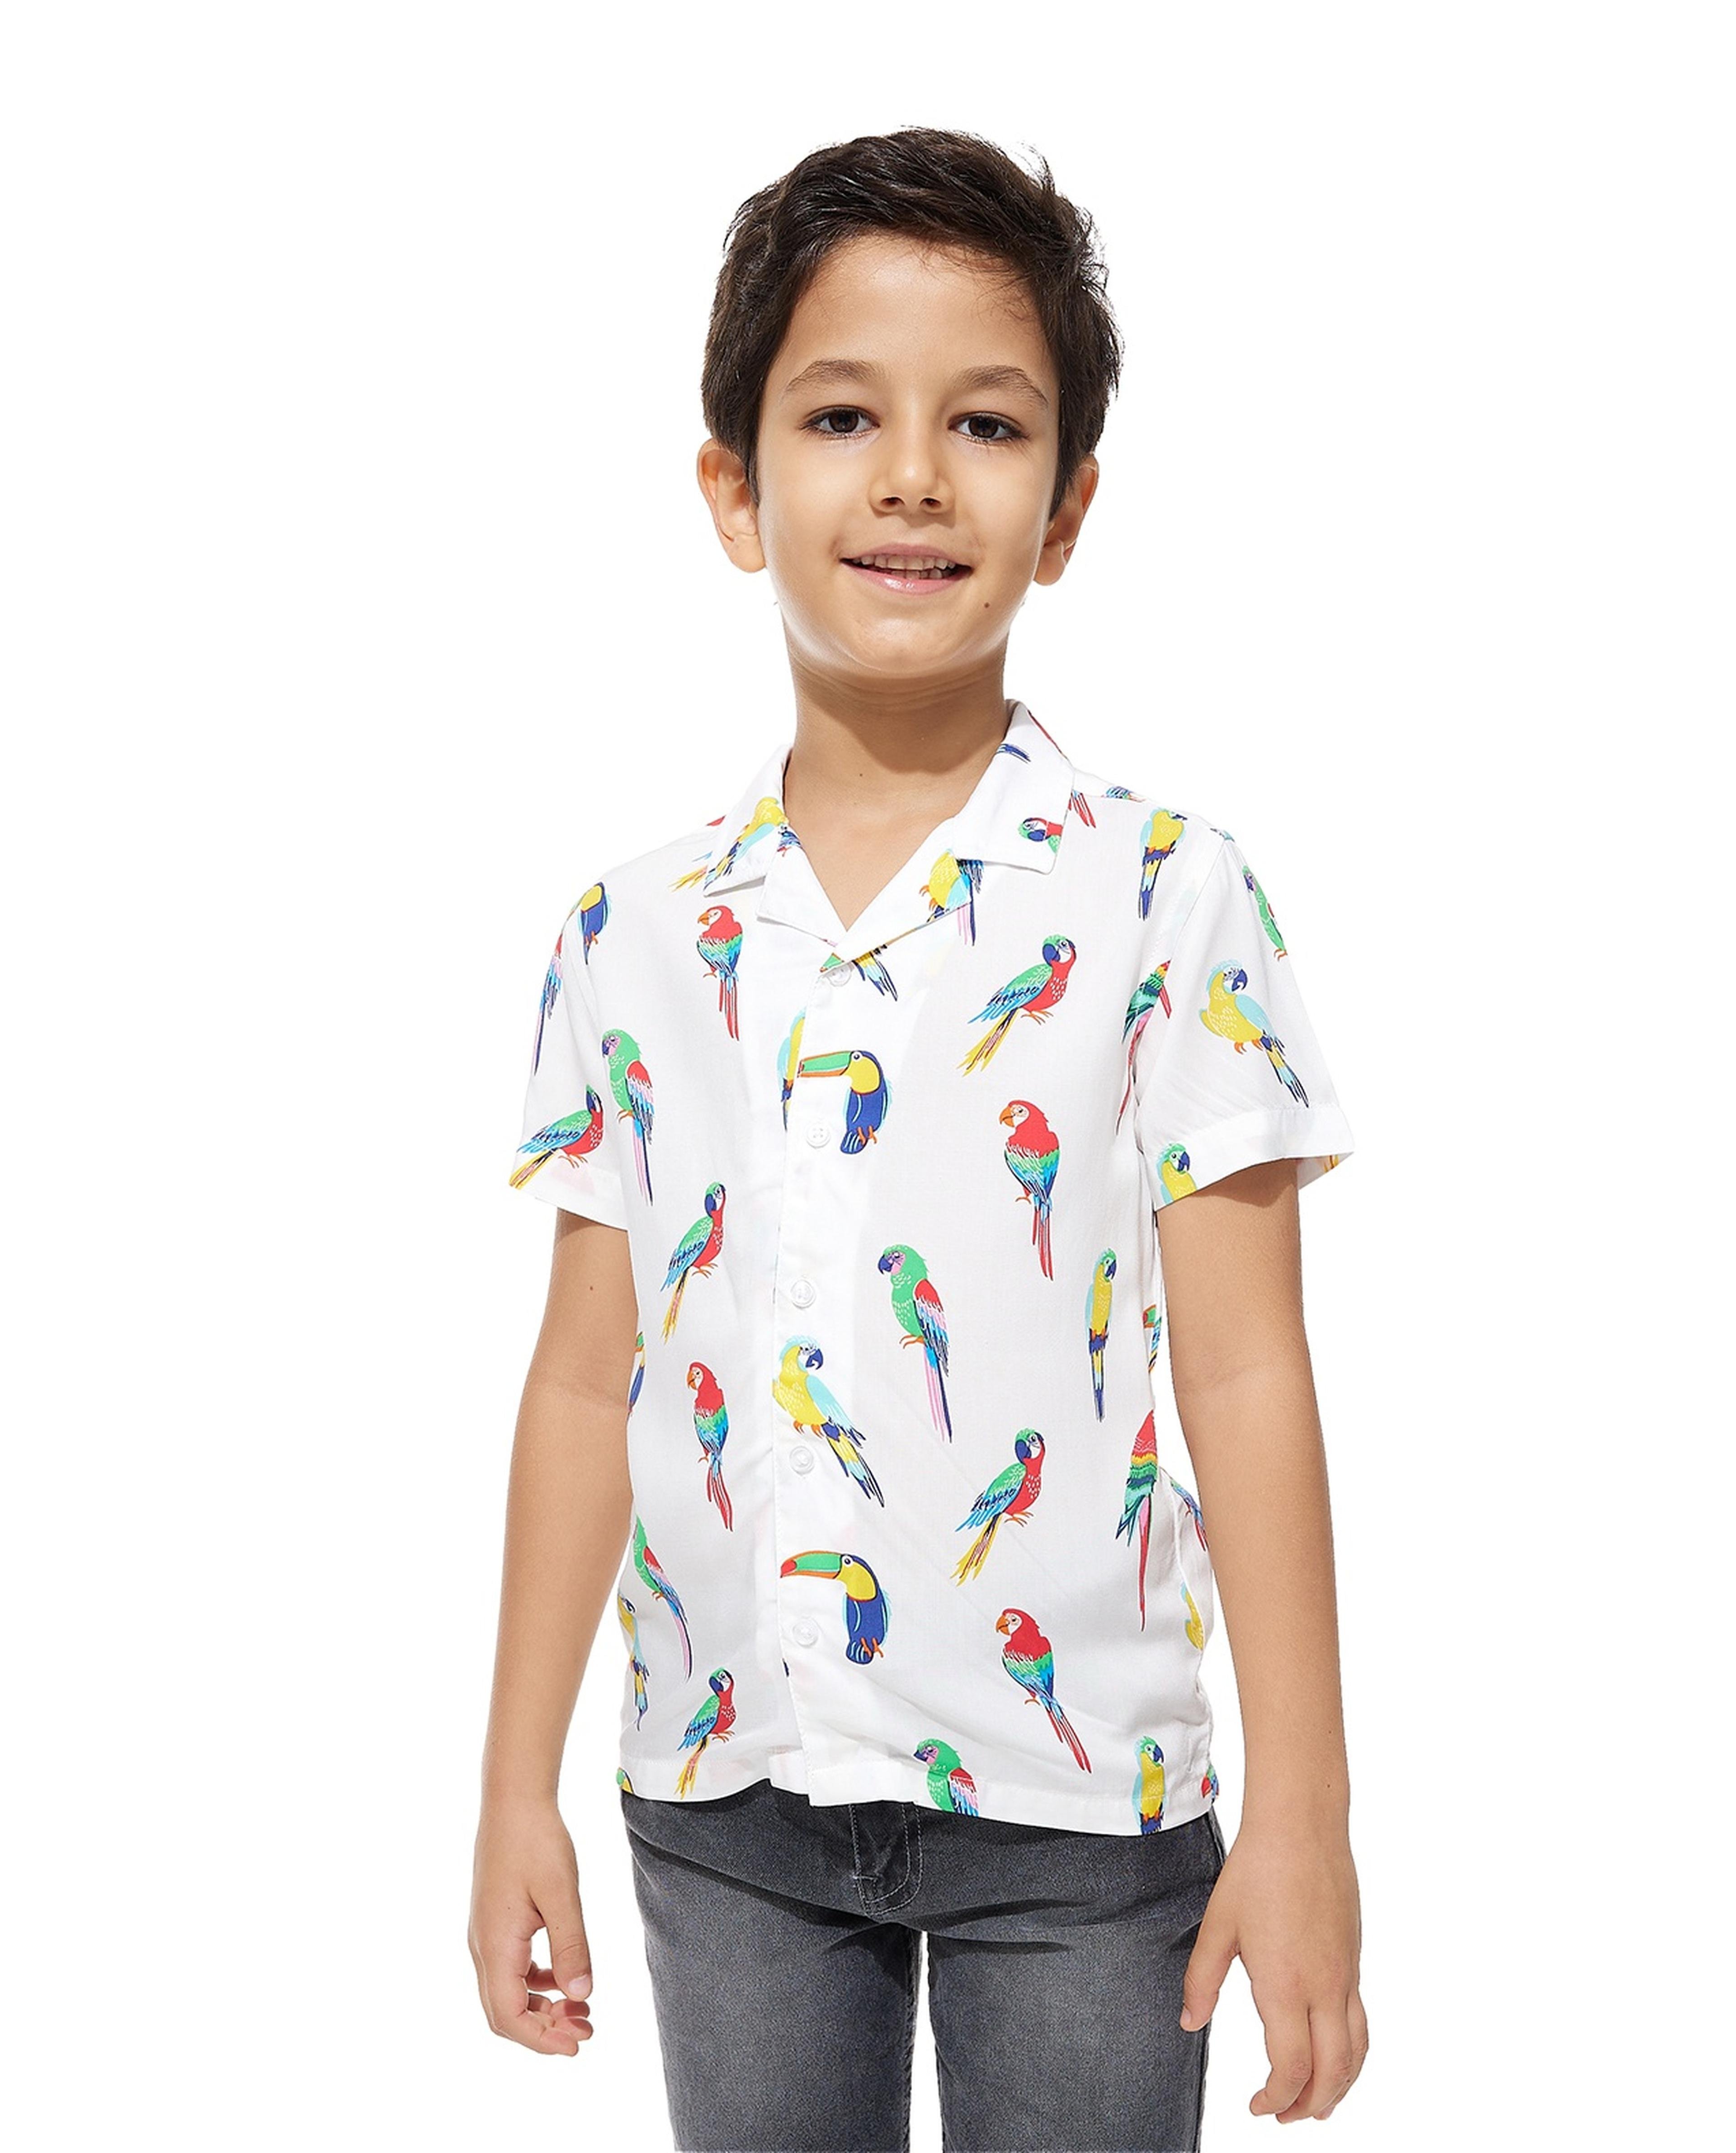 Parrot Print Shirt with Revere Collar and Short Sleeves